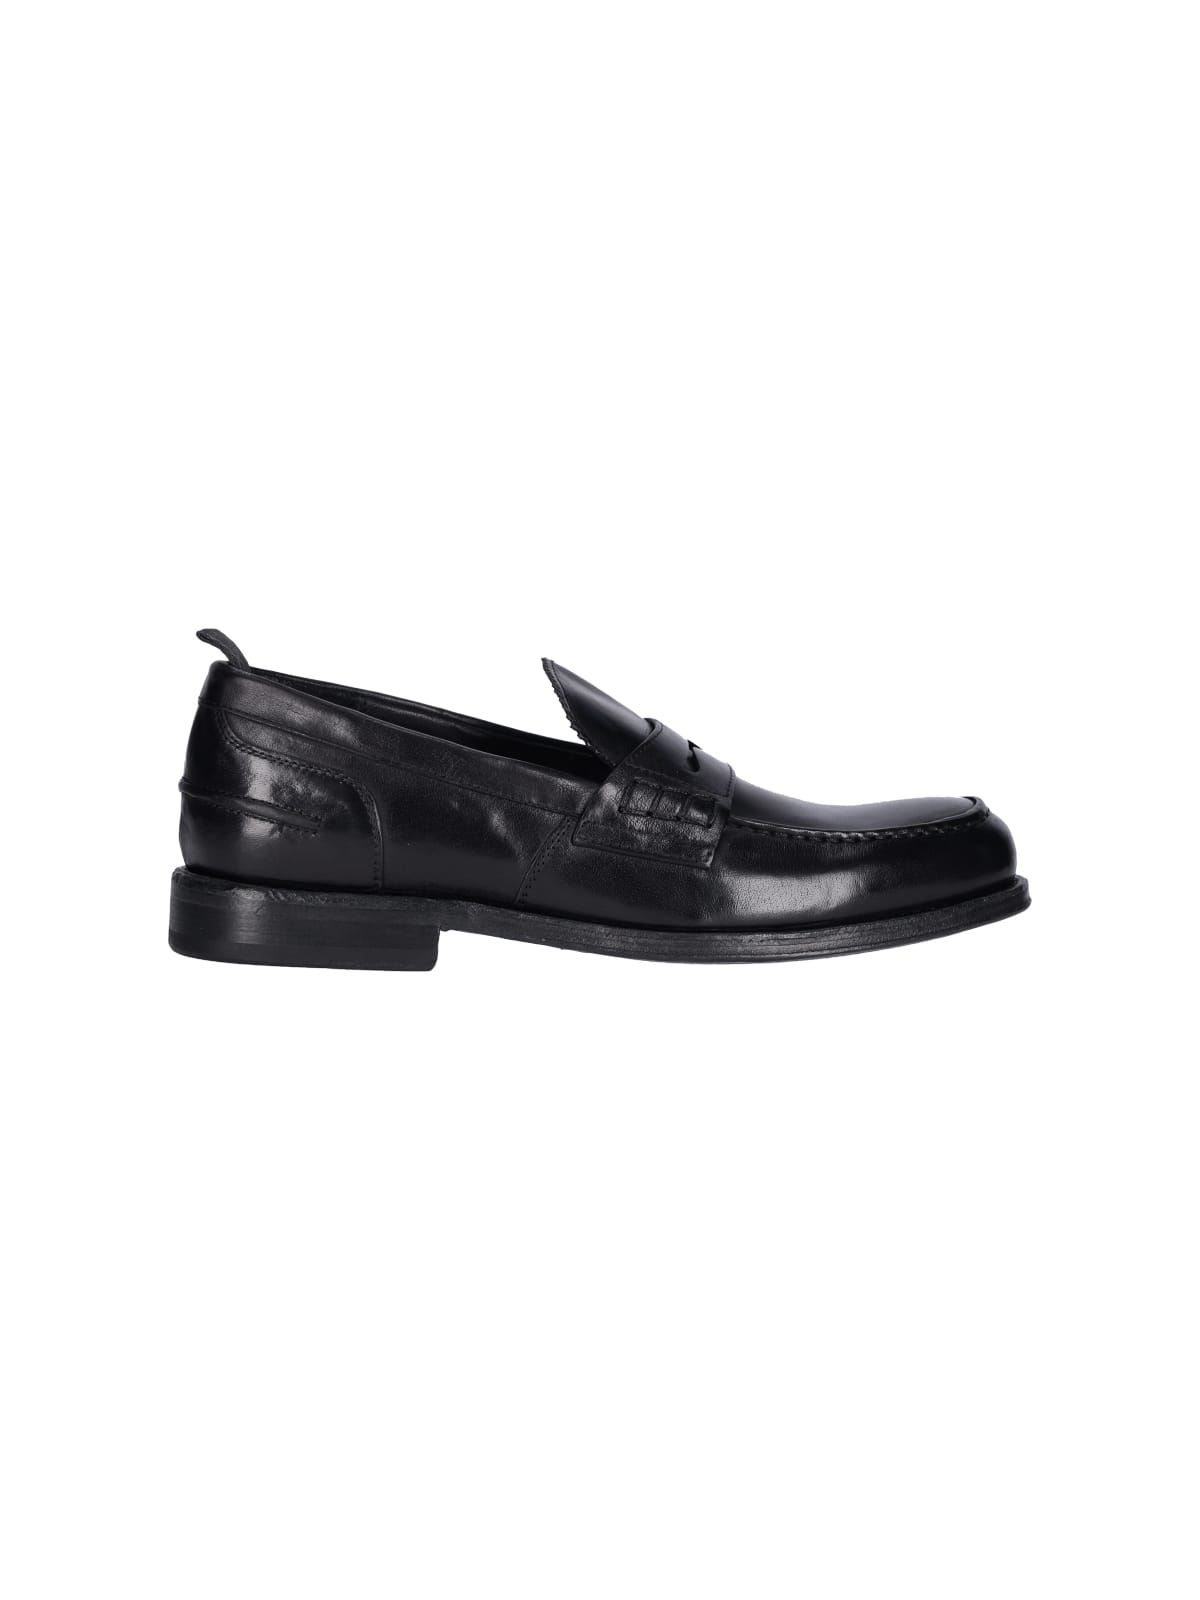 ALEXANDER HOTTO LOAFERS